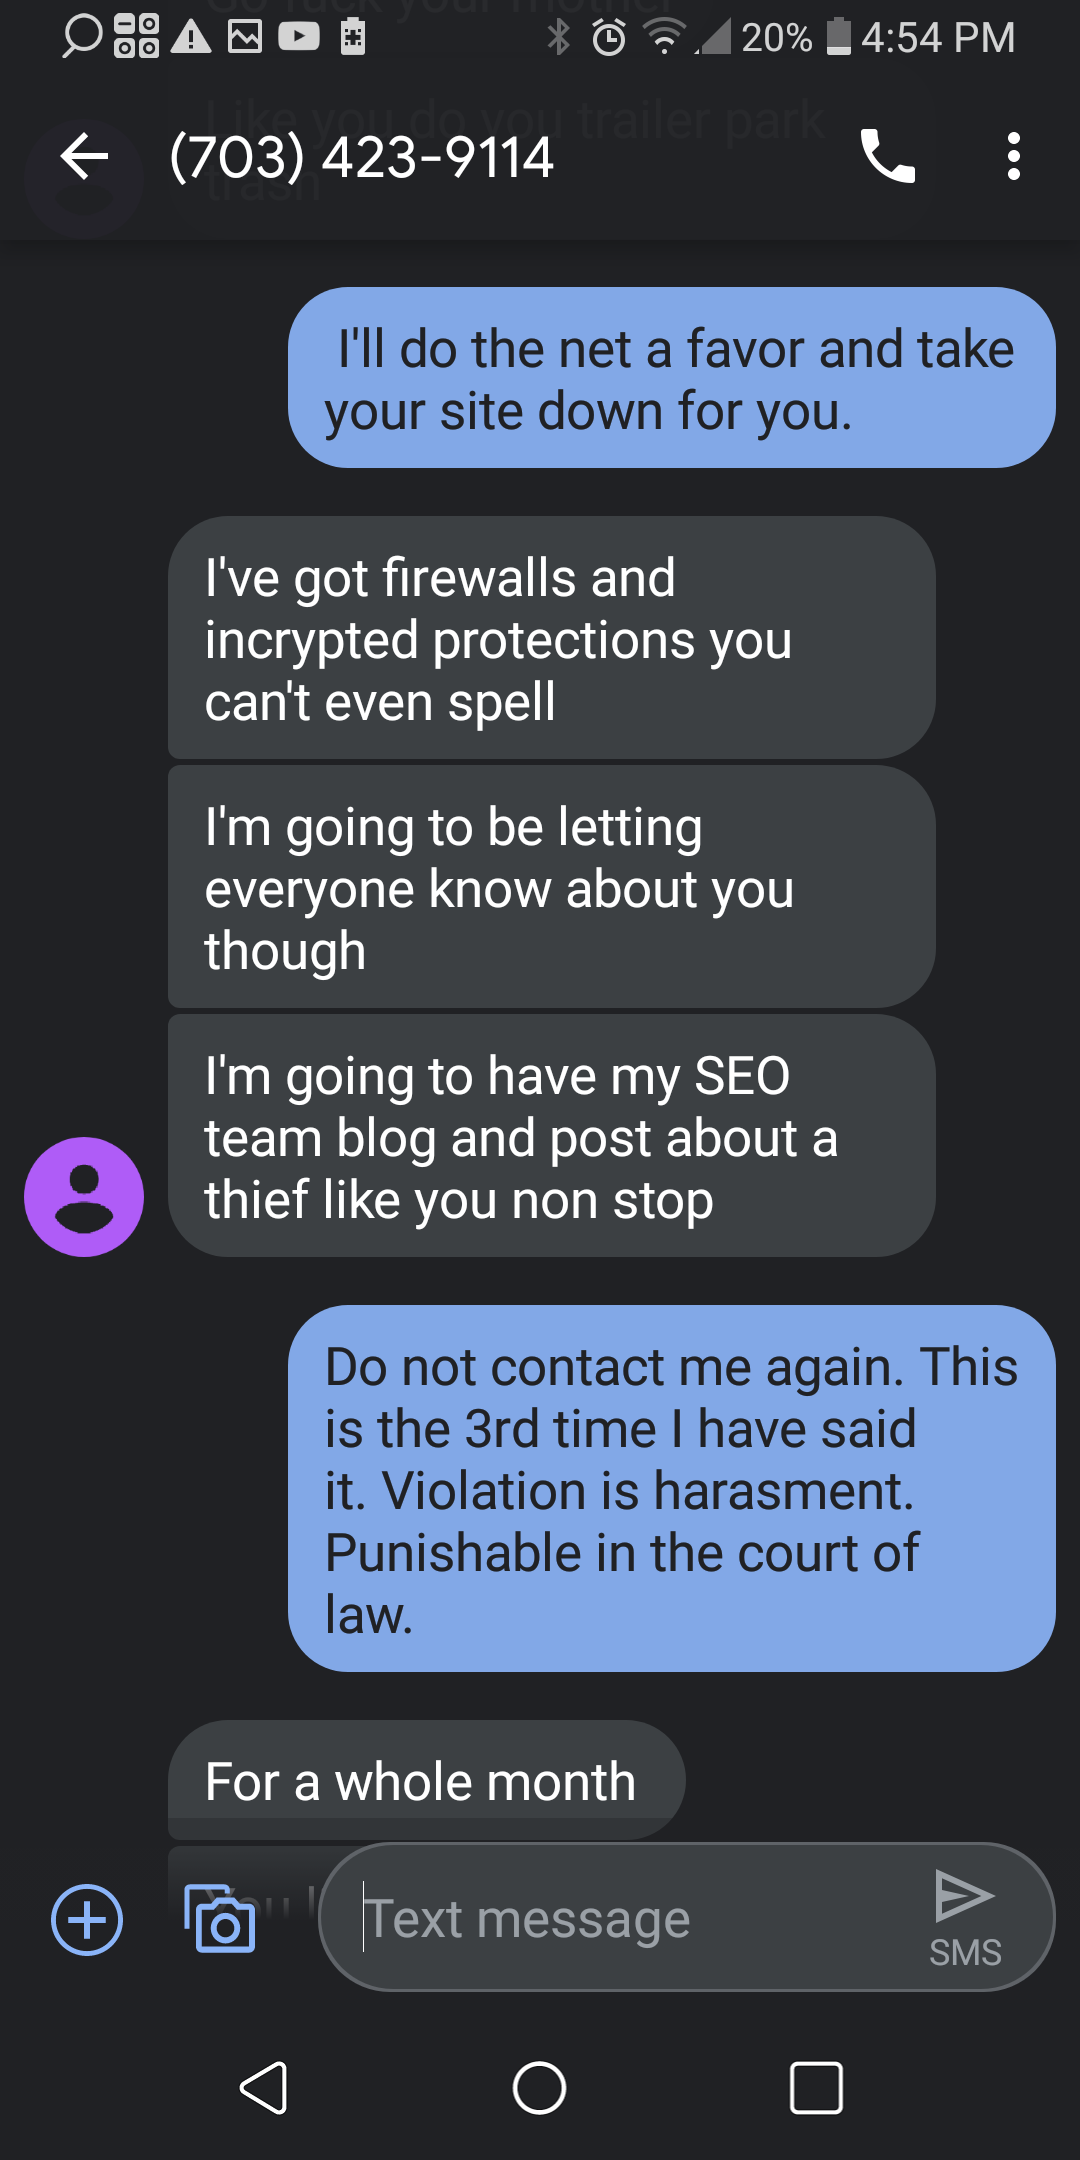 Gray filed this complaint, my messages are in blue